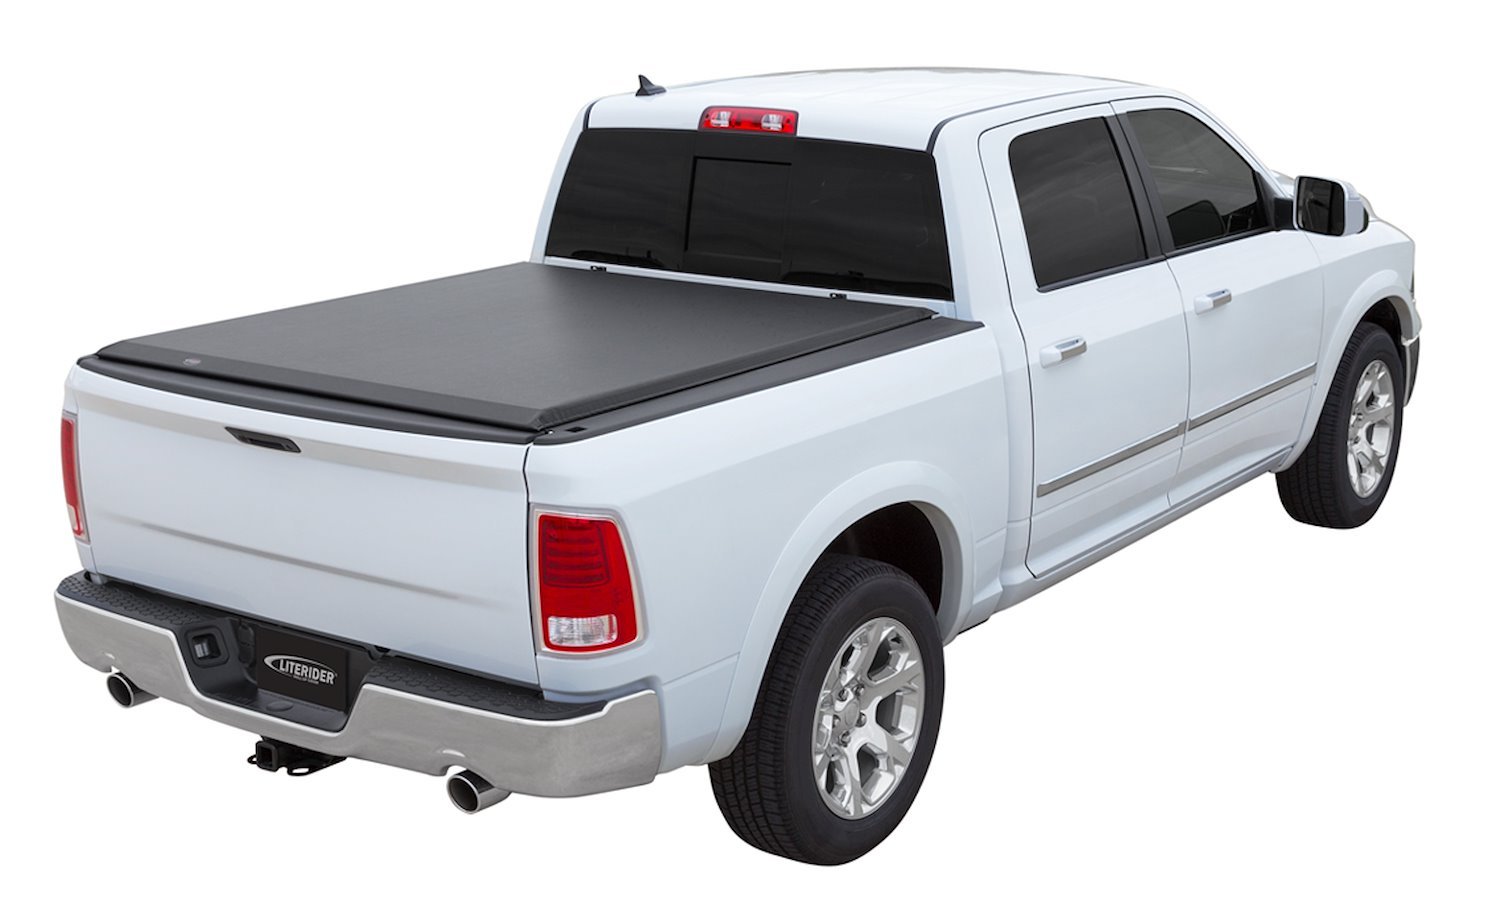 LITERIDER Roll-Up Tonneau Cover, Fits Select Ram 2500/3500, with 6 ft. 4 in. Bed